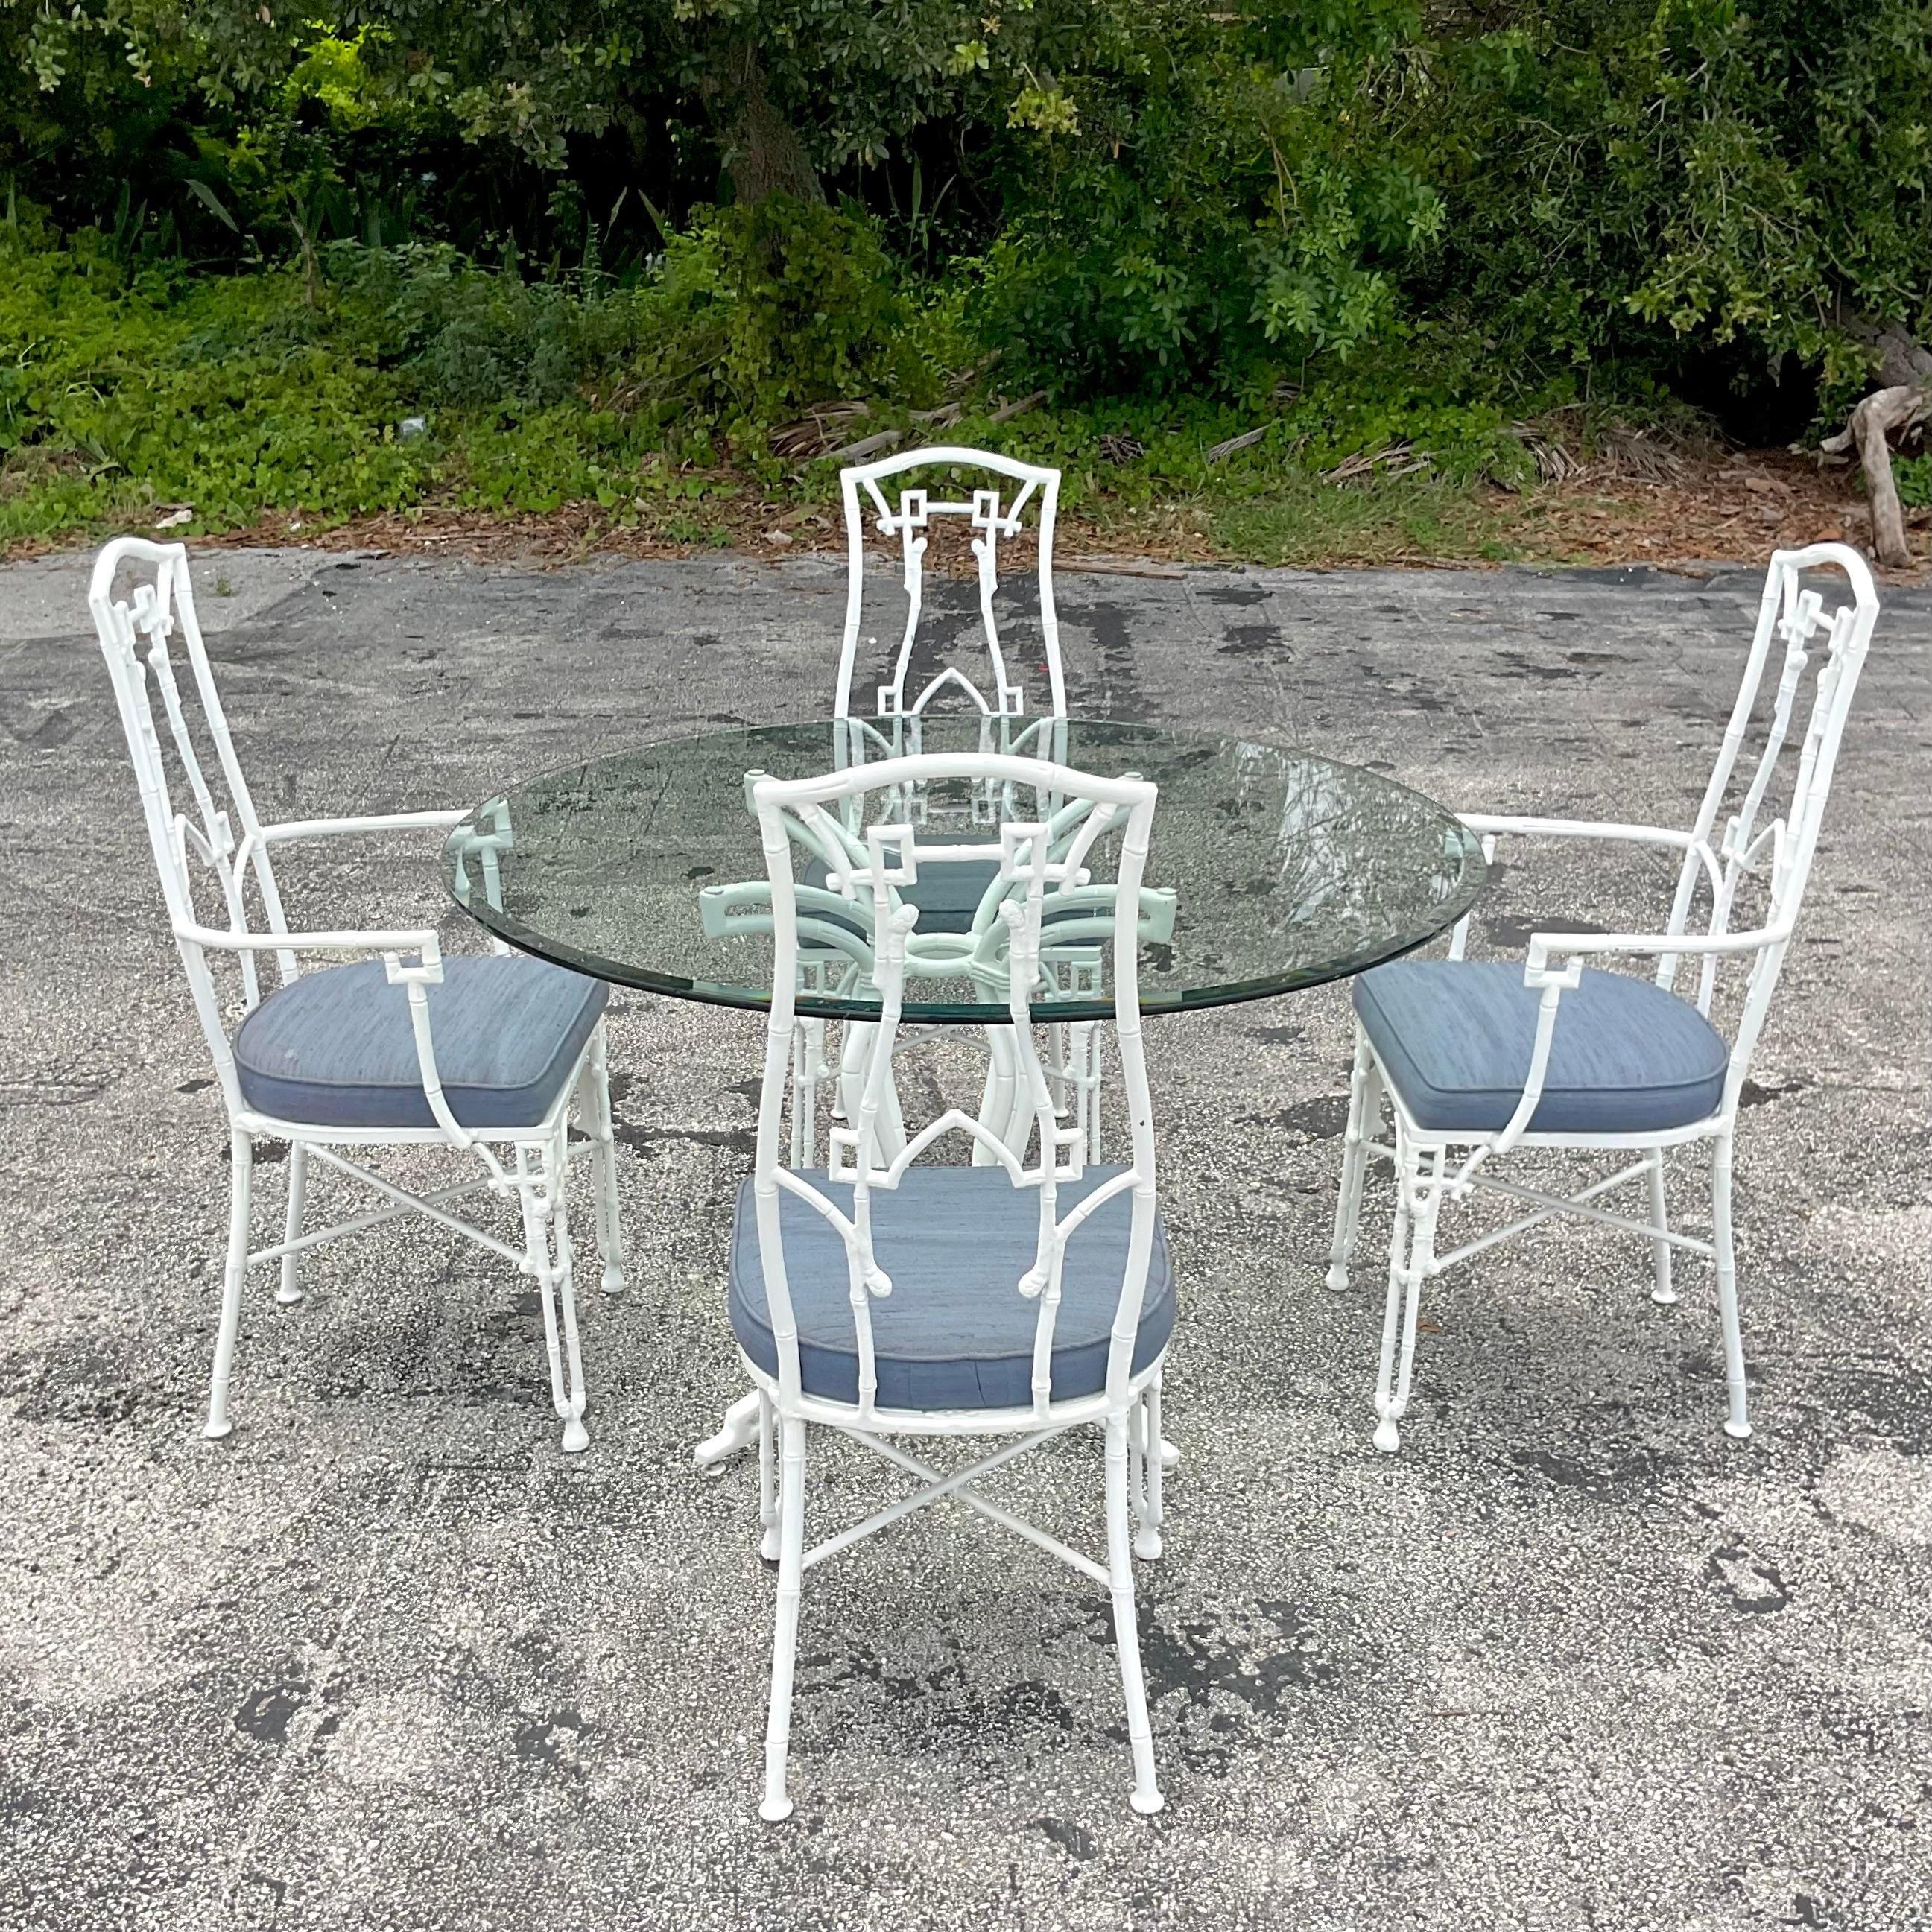 Hollywood Regency Vintage Coastal Cast Aluminum Bamboo Fretwork Outdoor Dining Chairs--Set of 4